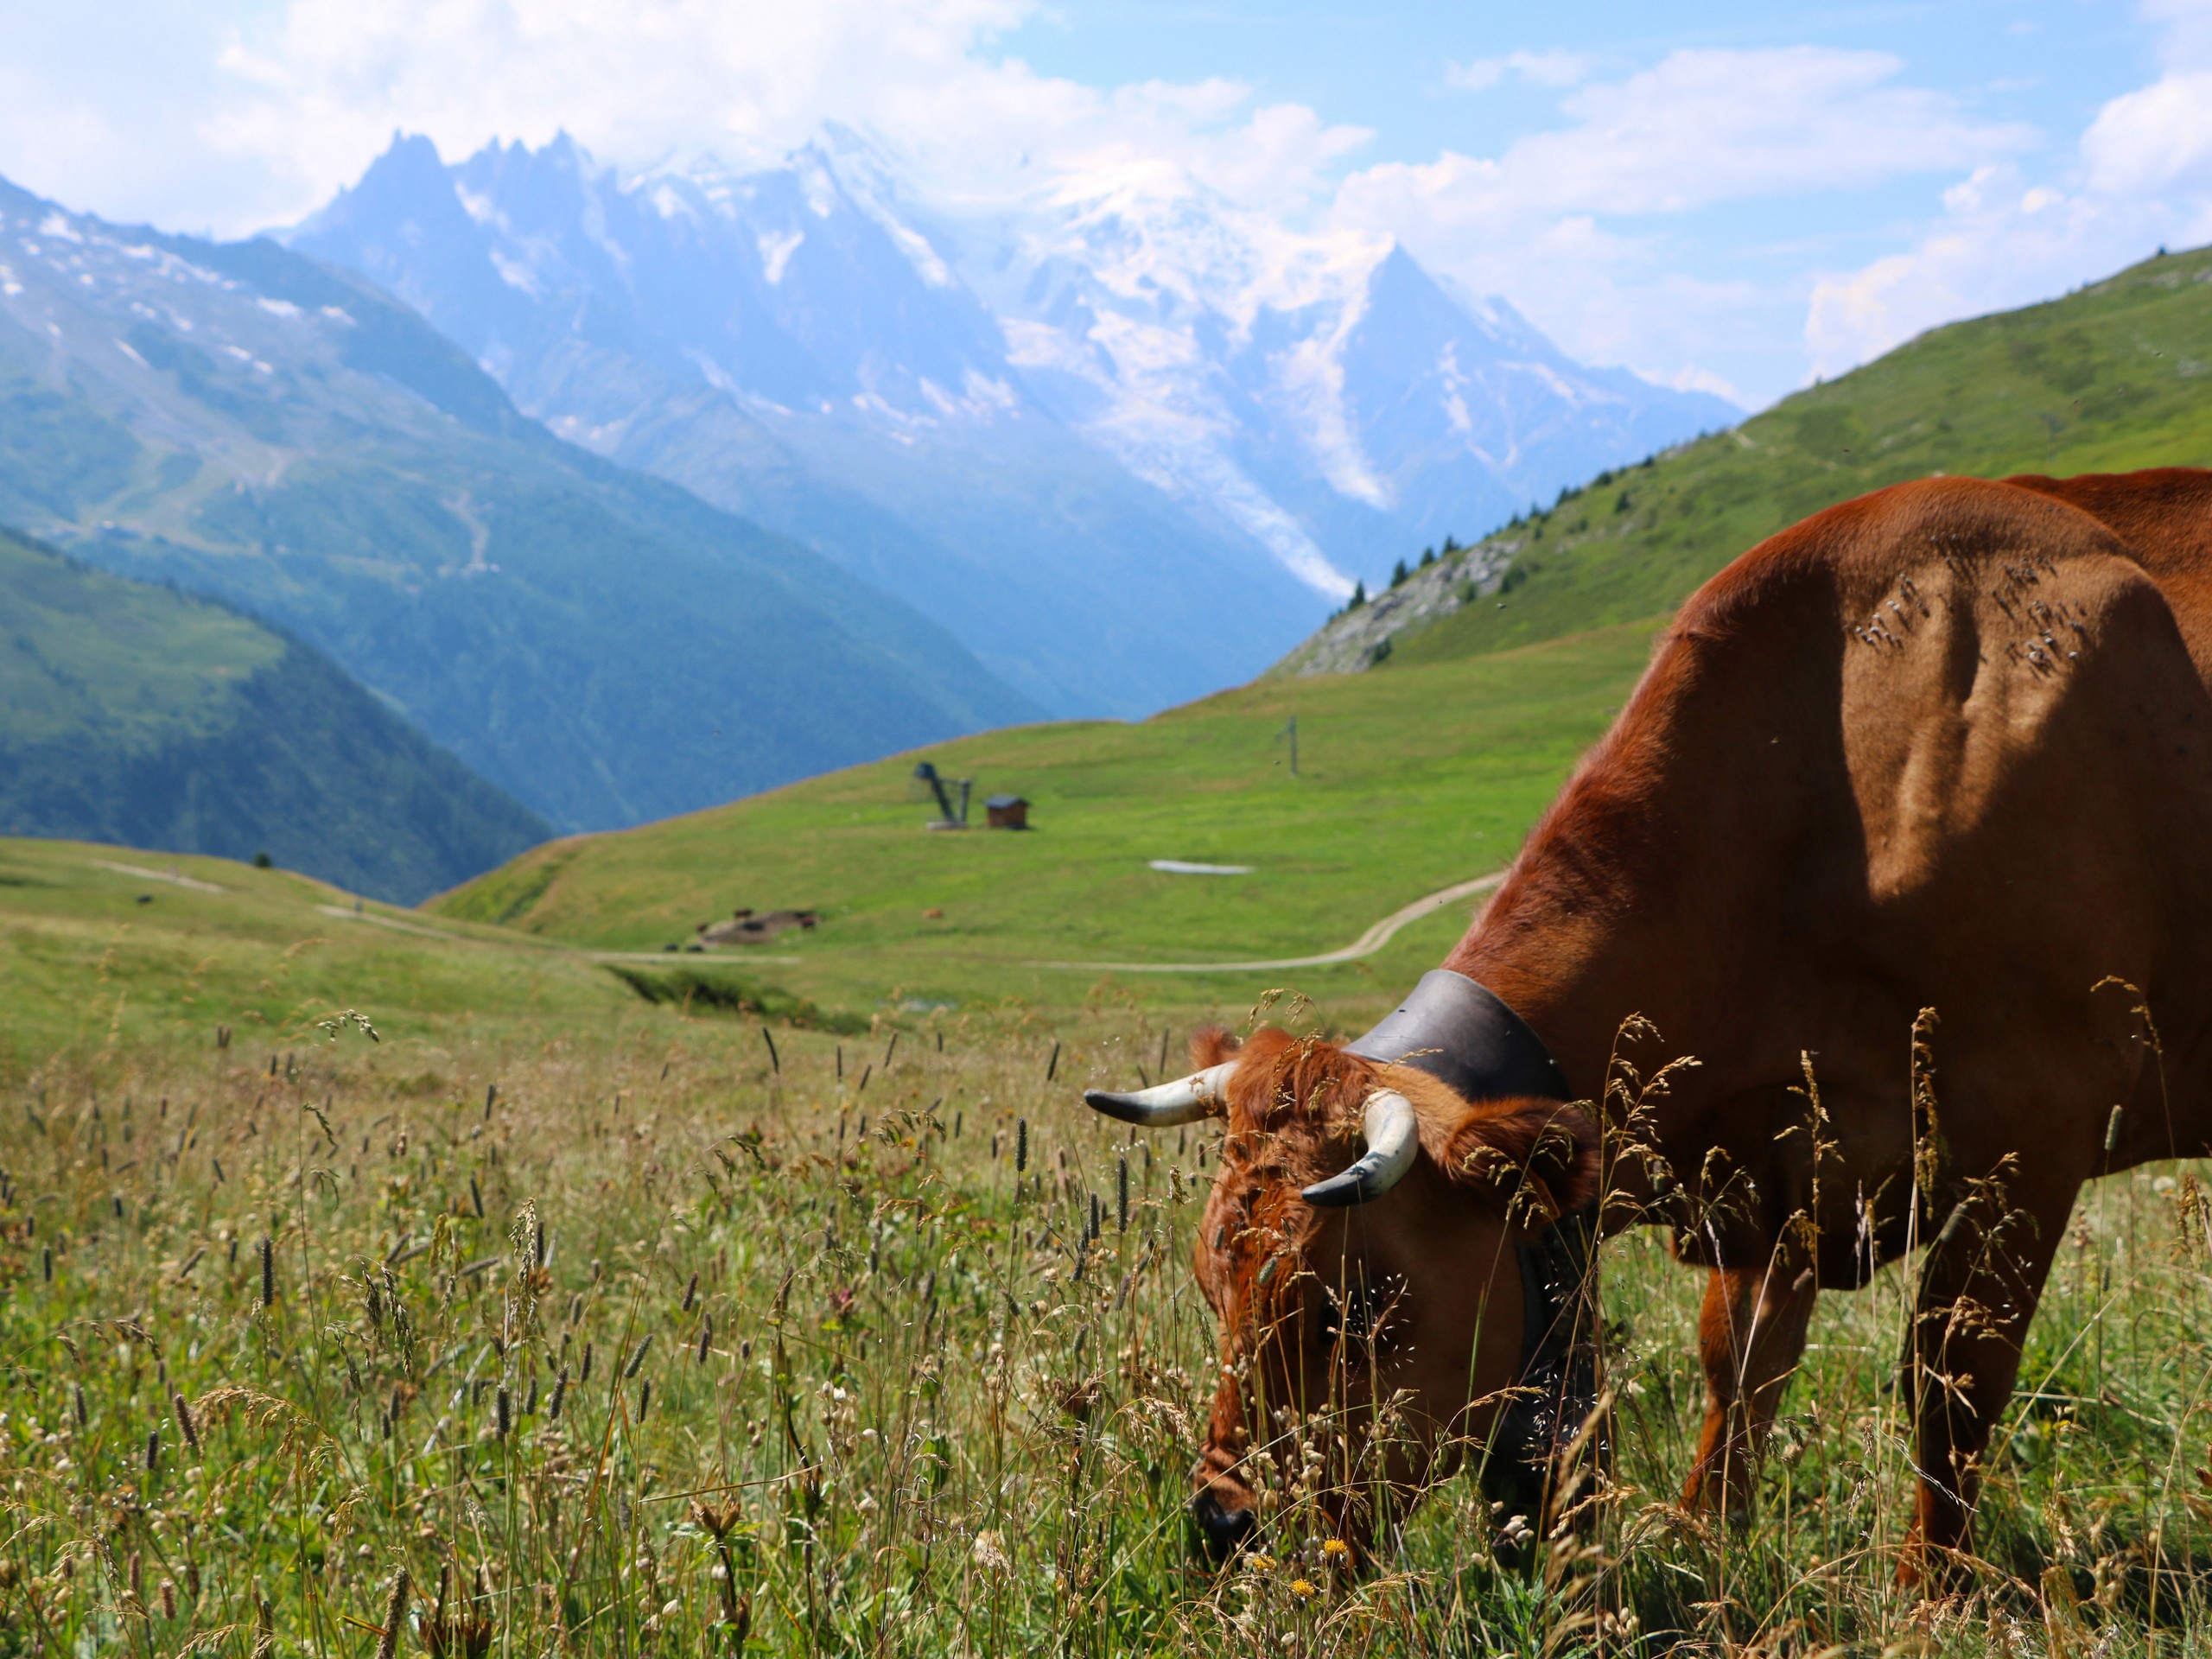 Cow met while cycling in the Alps